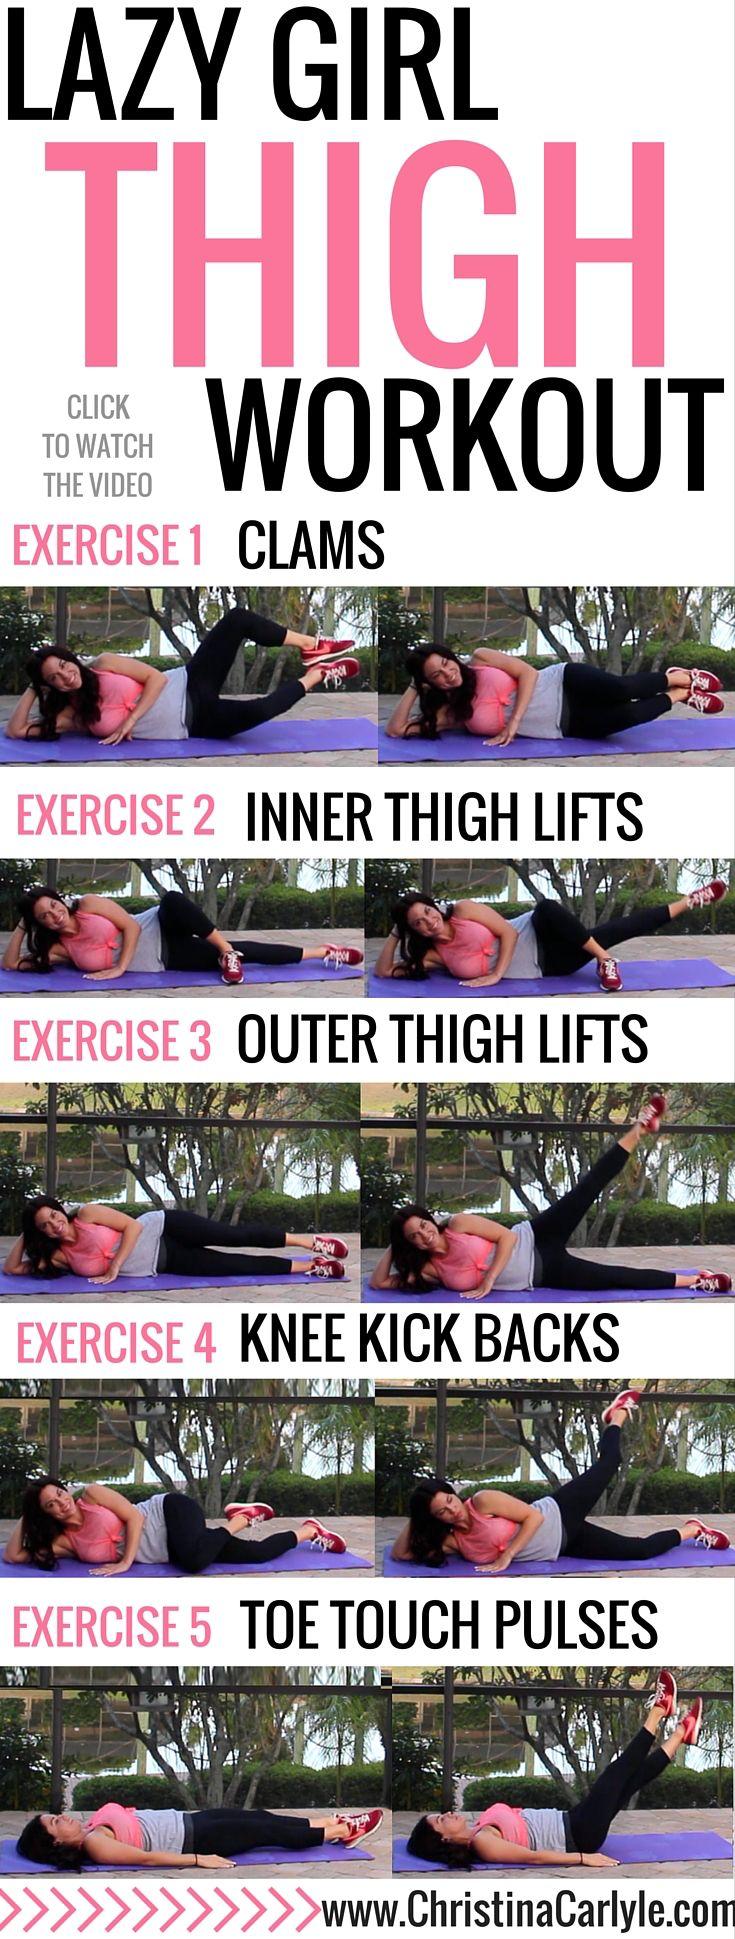 Mariage - Lazy Girl Thigh Workout - Christina Carlyle